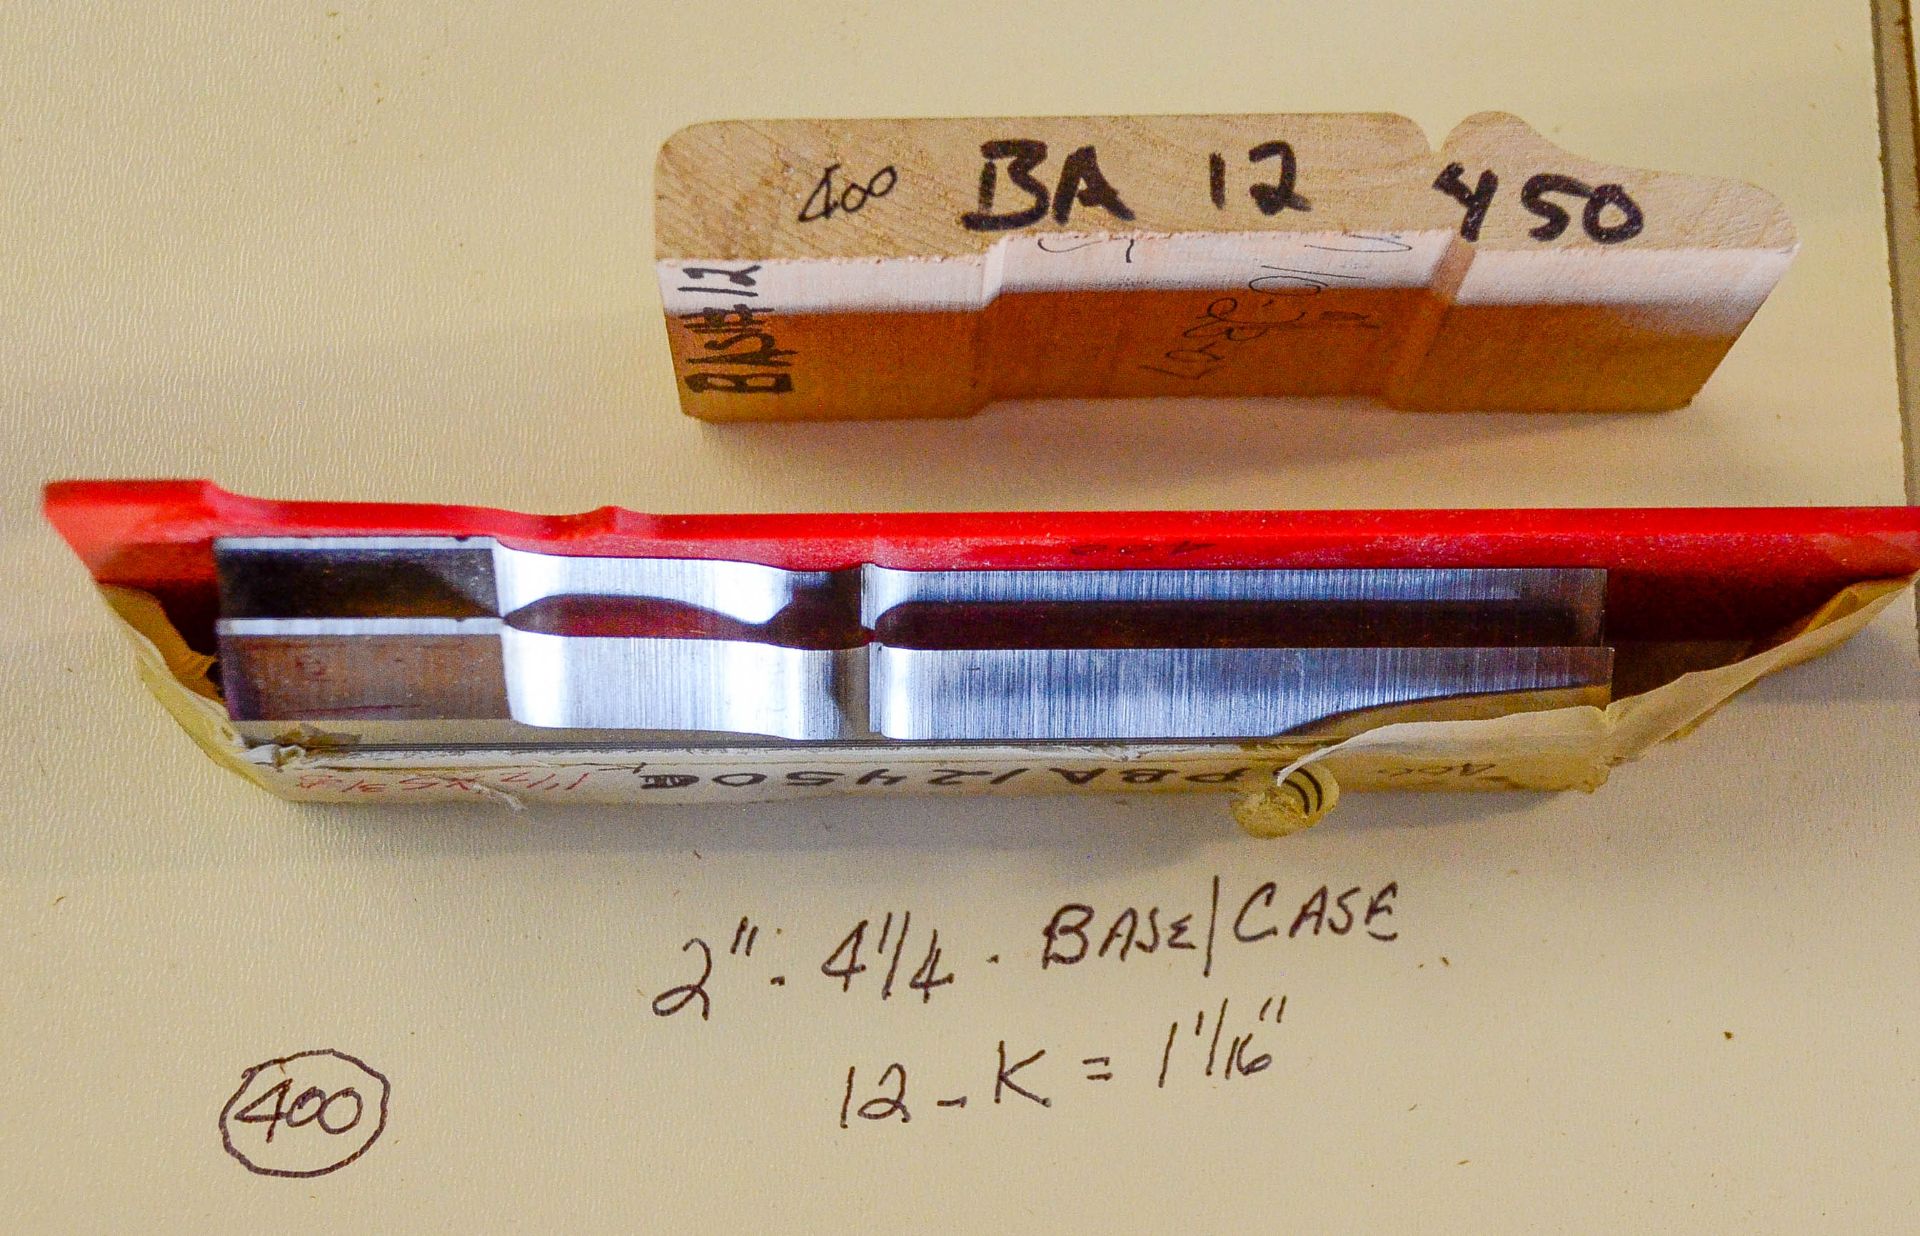 Moulding Knives, 2" - 4-1/4" Base/Case, 12 - K = 1-1/16", Knives are in Good Condition and Ready t - Image 2 of 2